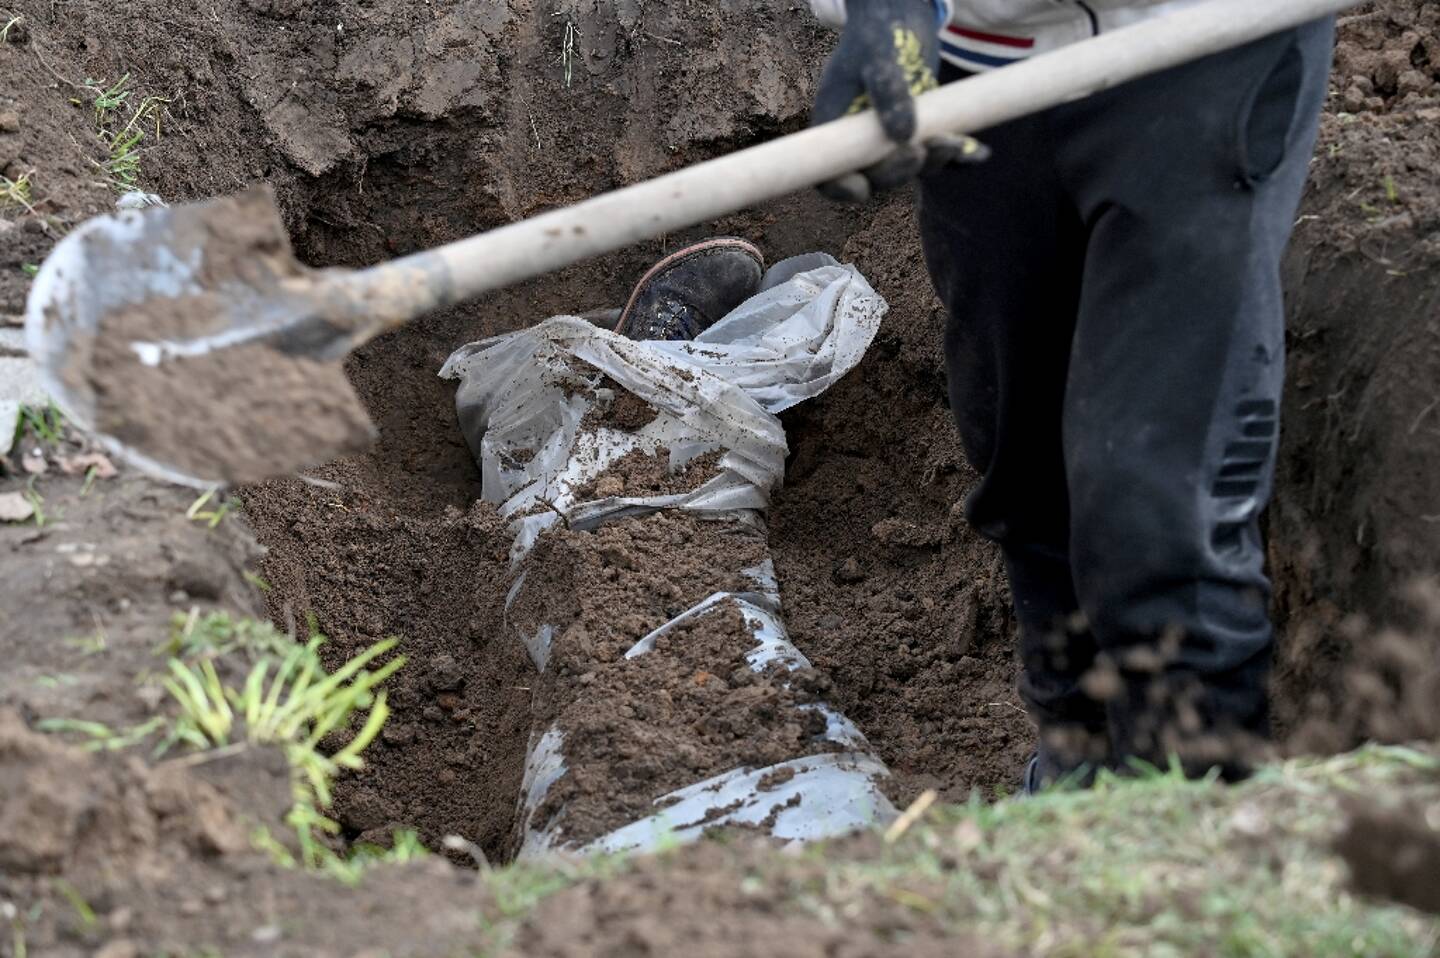 A municipal employee digs up the body of a victim in Andriivka, near Kiev, on April 11, 2022 in Ukraine.